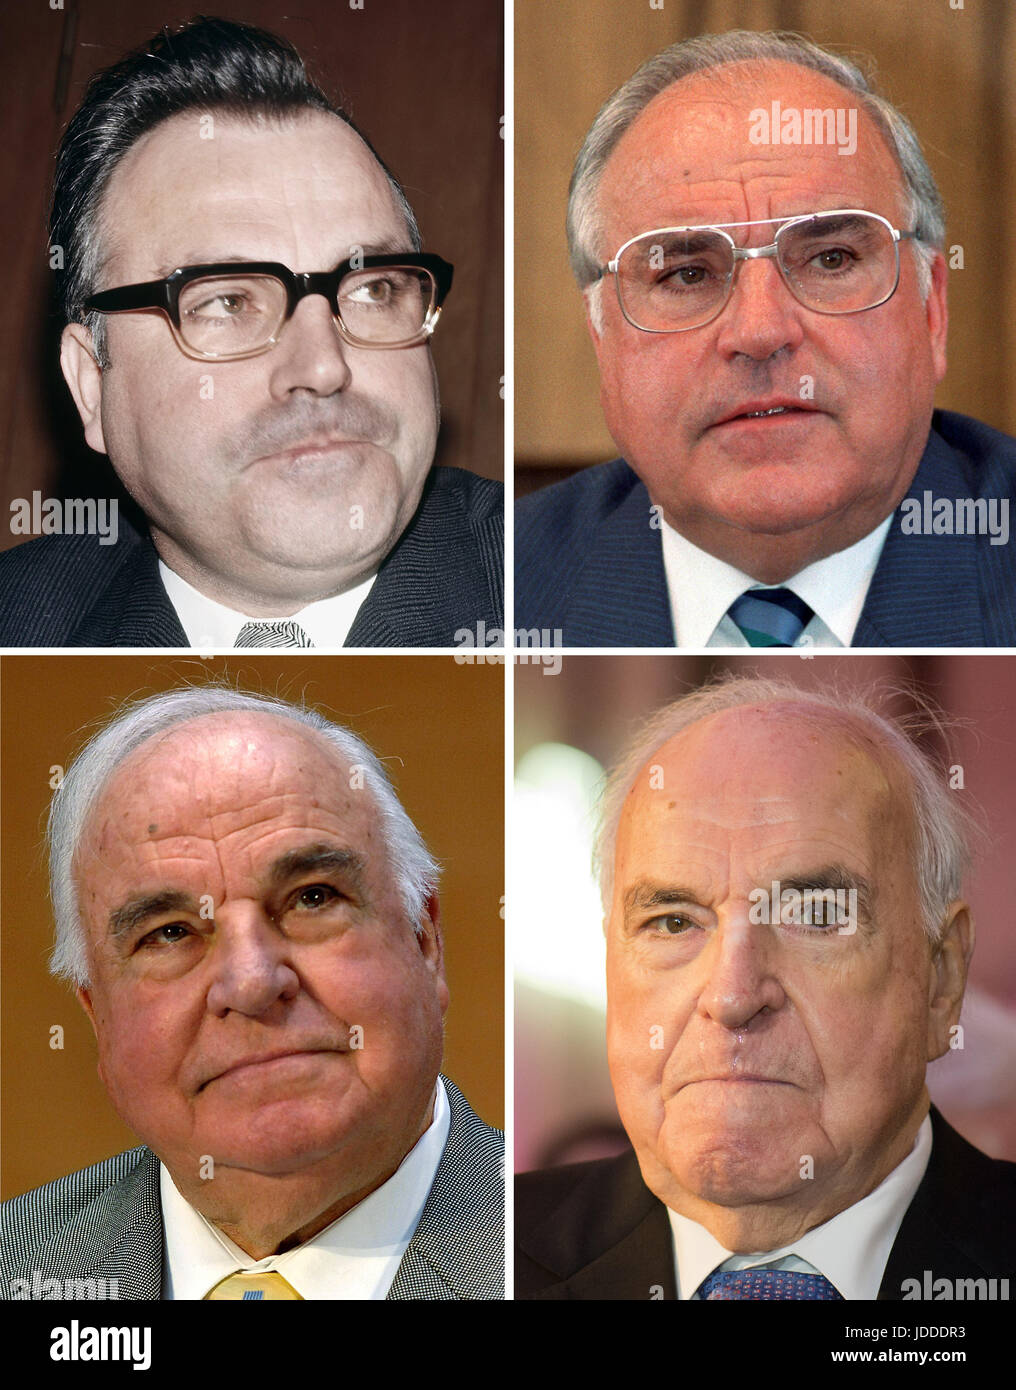 ARCHIVE - A combo of archive images shows the former German chancellor Helmut Kohl on (L-R, clockwise) the 07.03.1970, the 22.08.1989, the 05.11.2005 and the 19.12.2014. Kohl was the premier of the state of Rhineland Palatinate between 1969 and 1976 and chancellor of West Germany and then reunited Germany between 1982 and 1998. He was the head of the CDU between 1973 and 1998. Photo: dpa Stock Photo